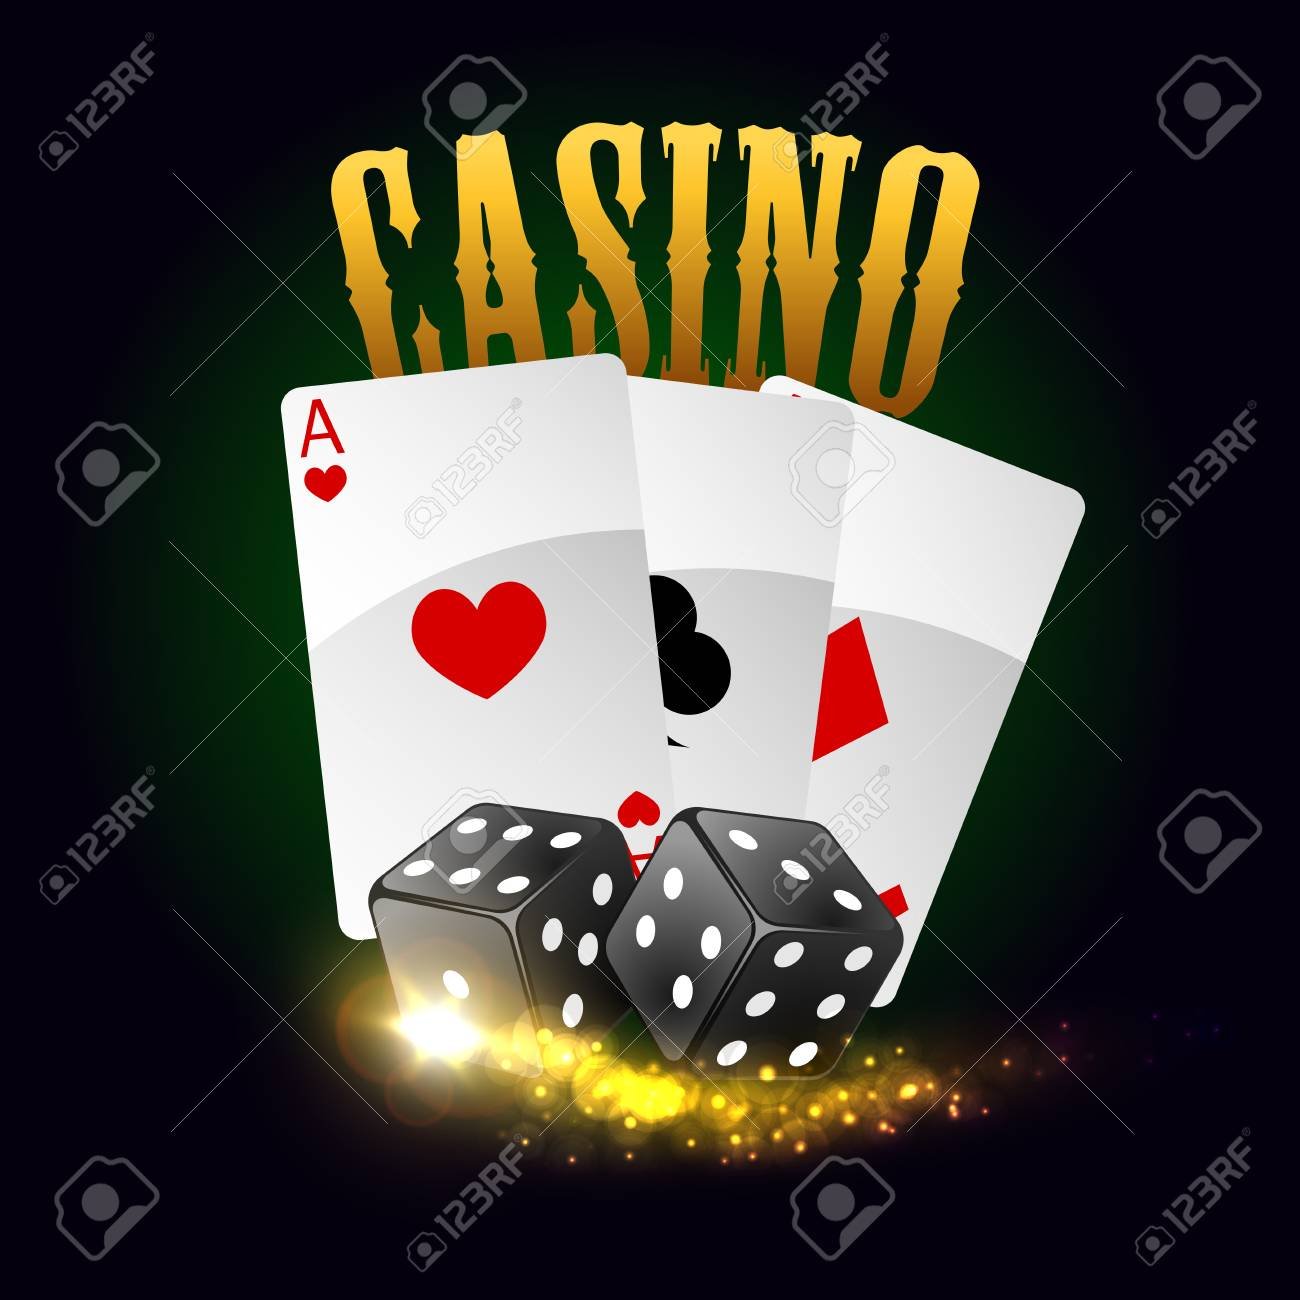 Casino poker cards with spades, hearts, clubs and gaming dices with lucky number combination. Vector poster with gold glittering light sparkles. Las Vegas casino gaming bets concept with golden letters